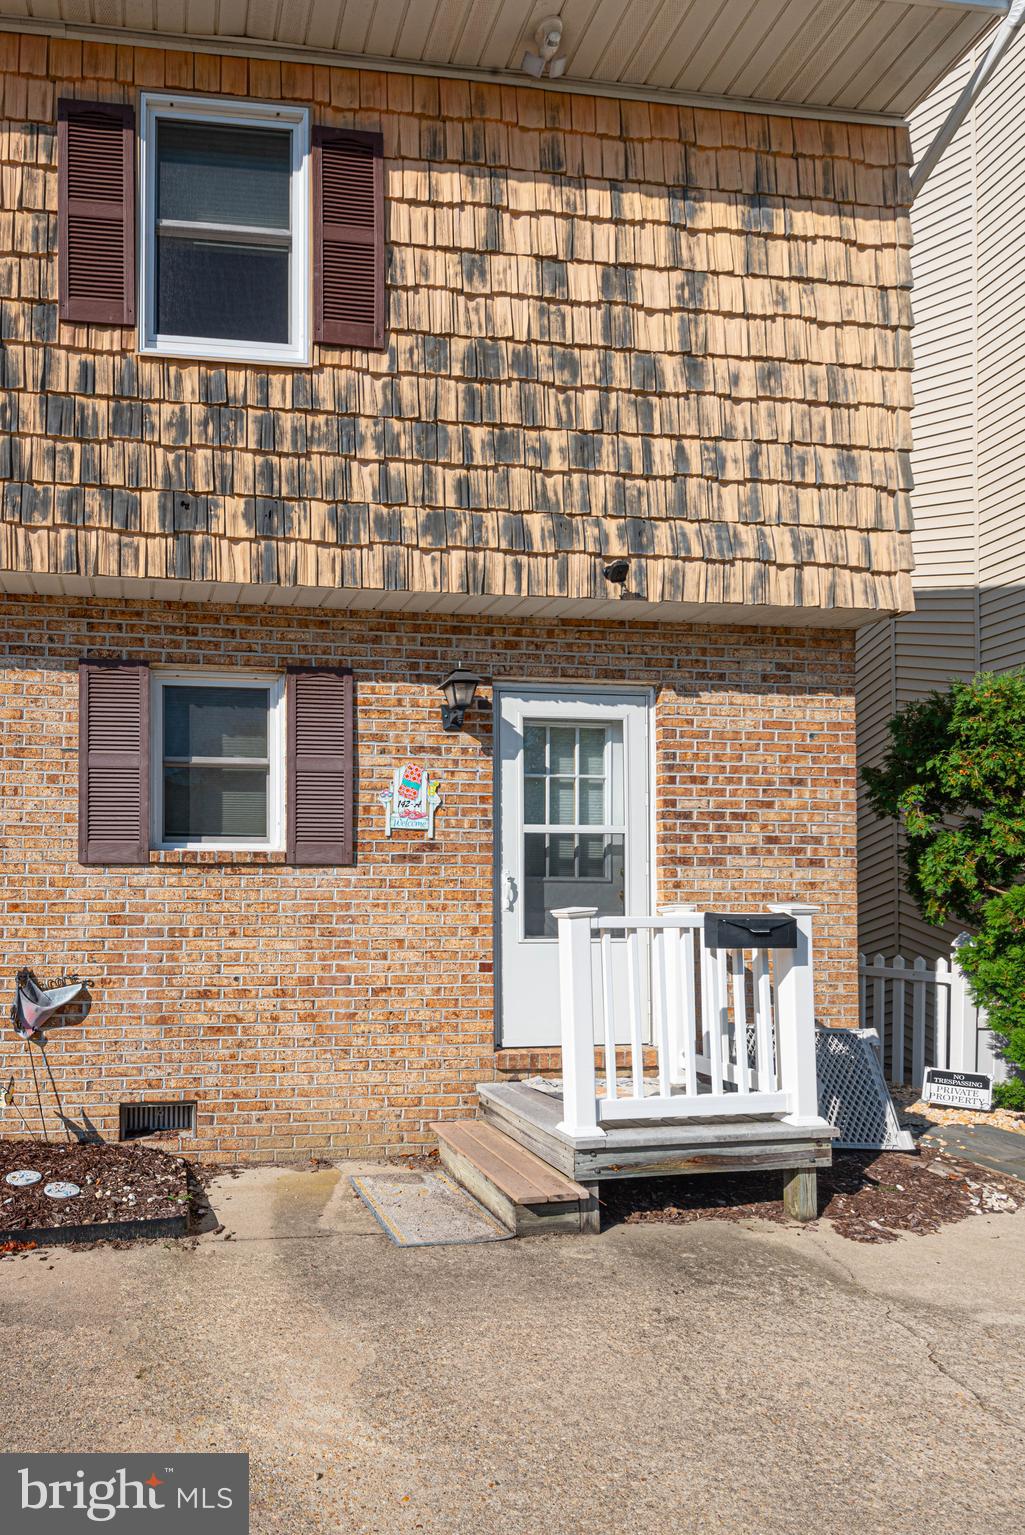 End-of-group townhouse with two deeded boat slips on the canal.  Two large bedrooms with full bathrooms on 2nd floor. Half bath on 1st floor. No condo fees. Full-size washer/ dryer on 2nd floor where bedrooms are located. Sold as-is.